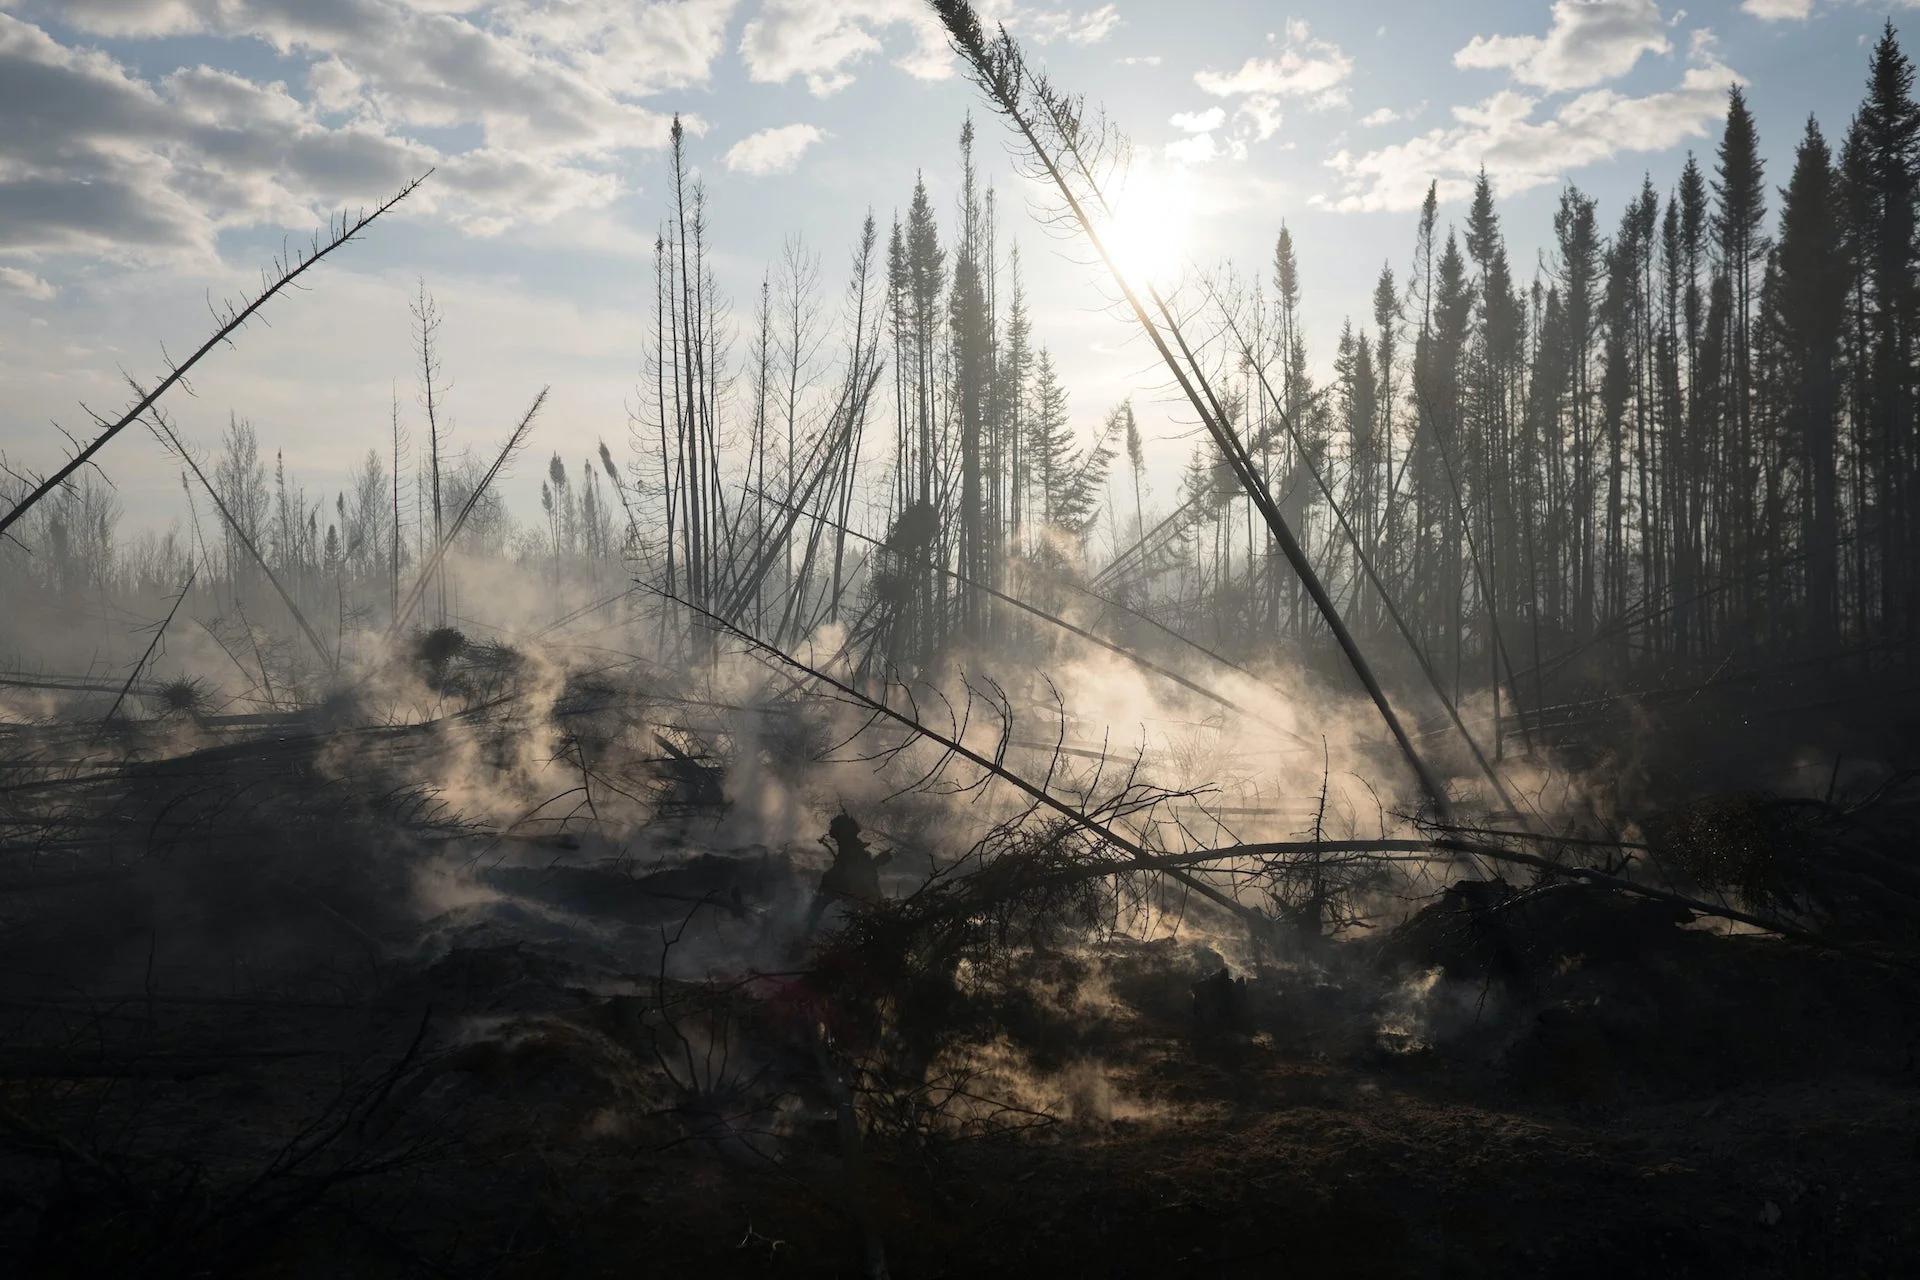 Human activities are fuelling wildfires that burn carbon-sequestering peatlands